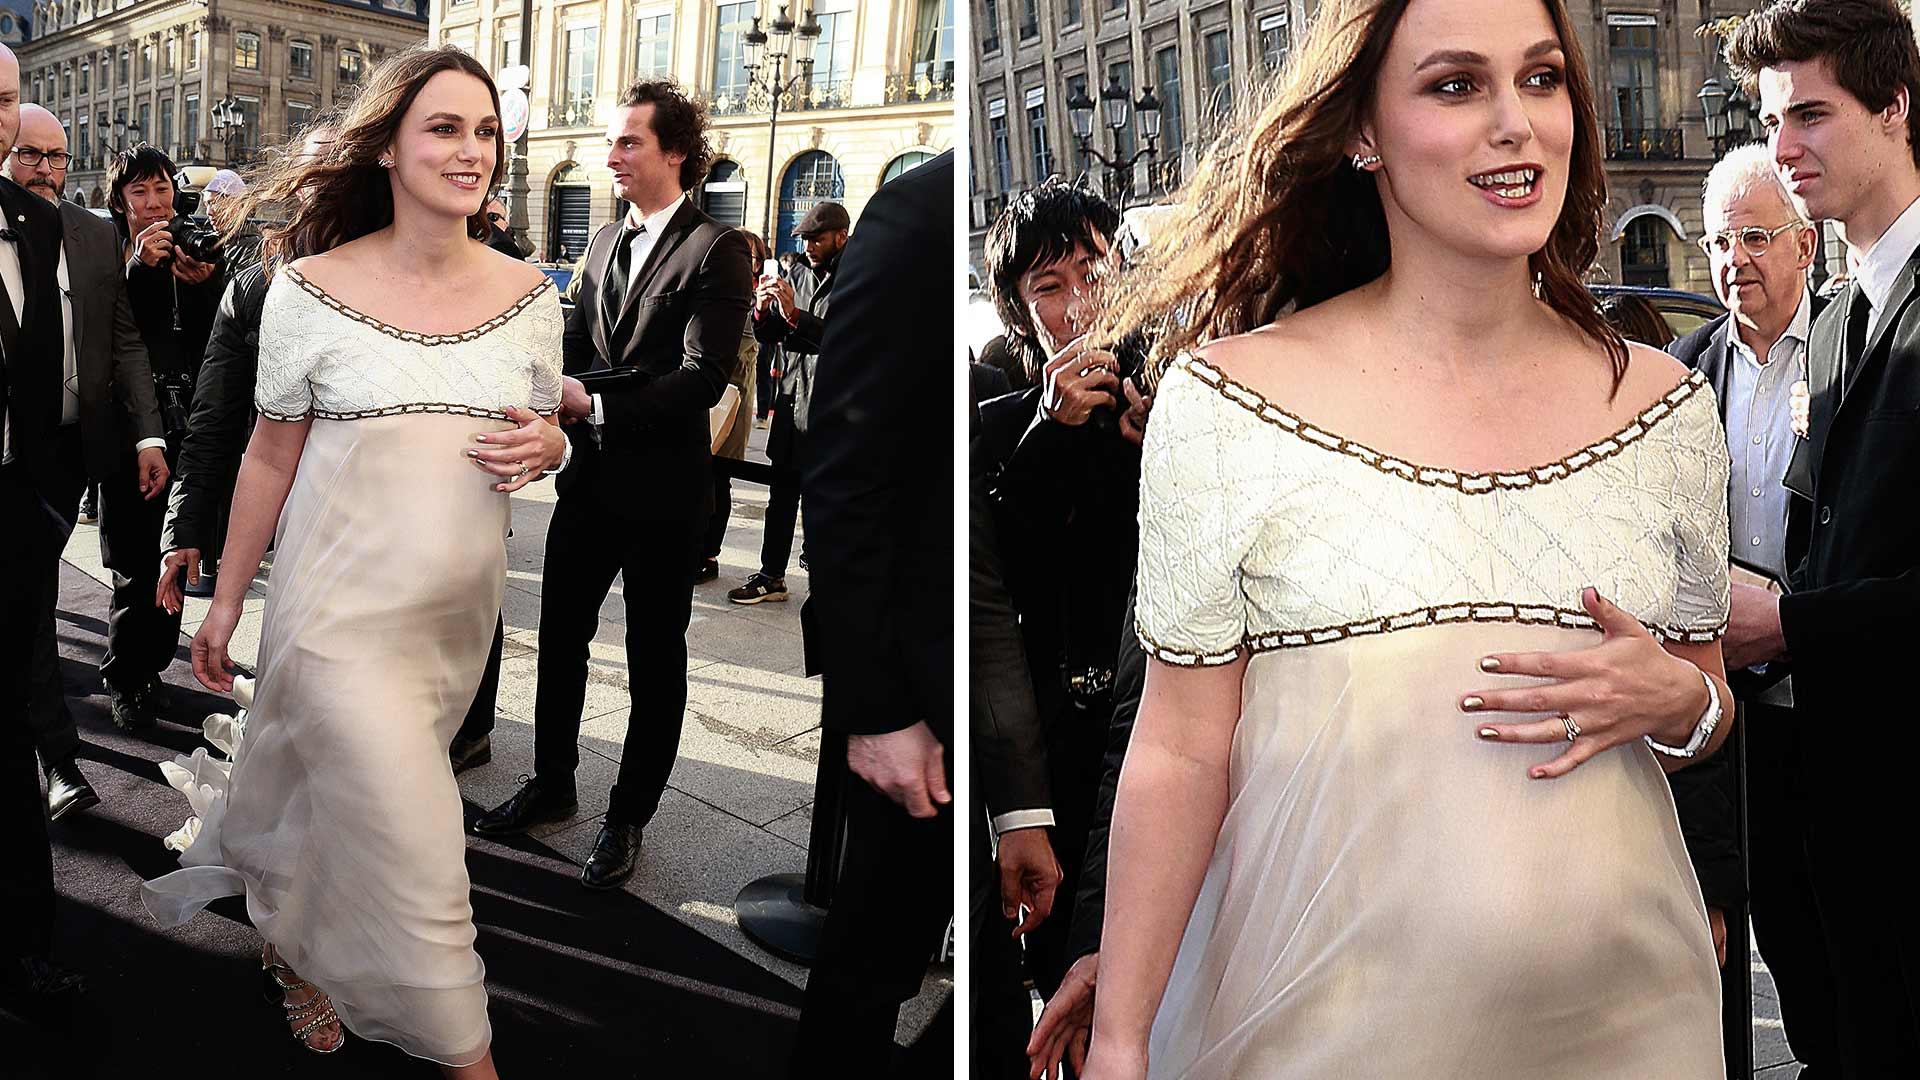 Keira Knightley Reveals She Is Pregnant With Baby #2